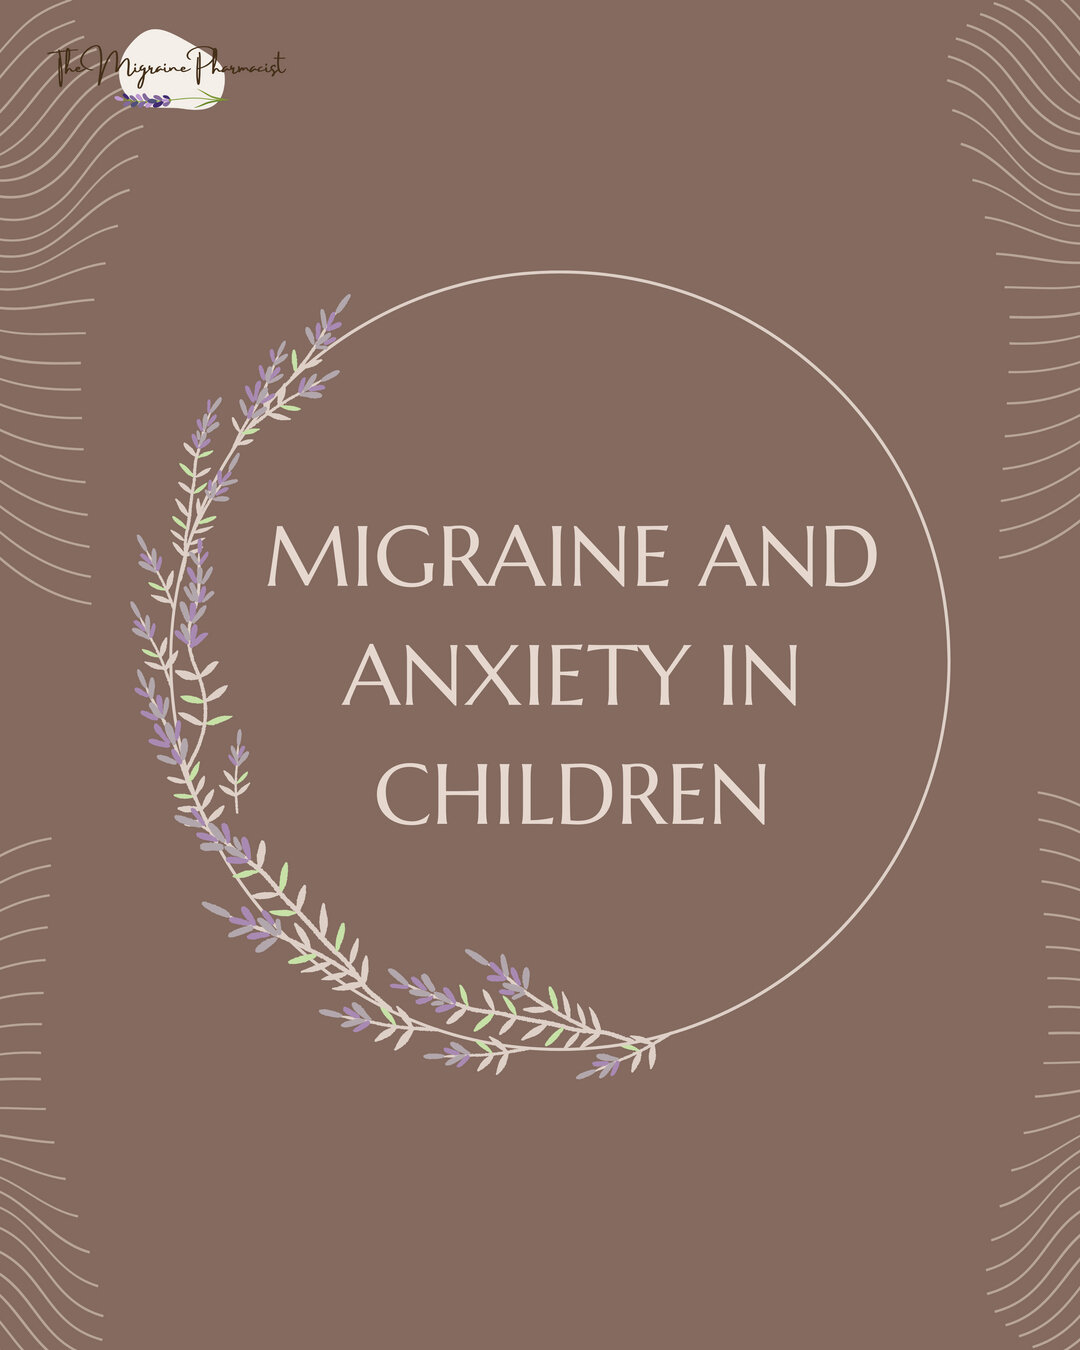 Anxiety is a common feature between children and adults living with migraine, whether it is the fear of an attack that brings on anxiety, or anxiety that triggers an attack, learning to manage anxiety is a very useful life skill your child needs to l